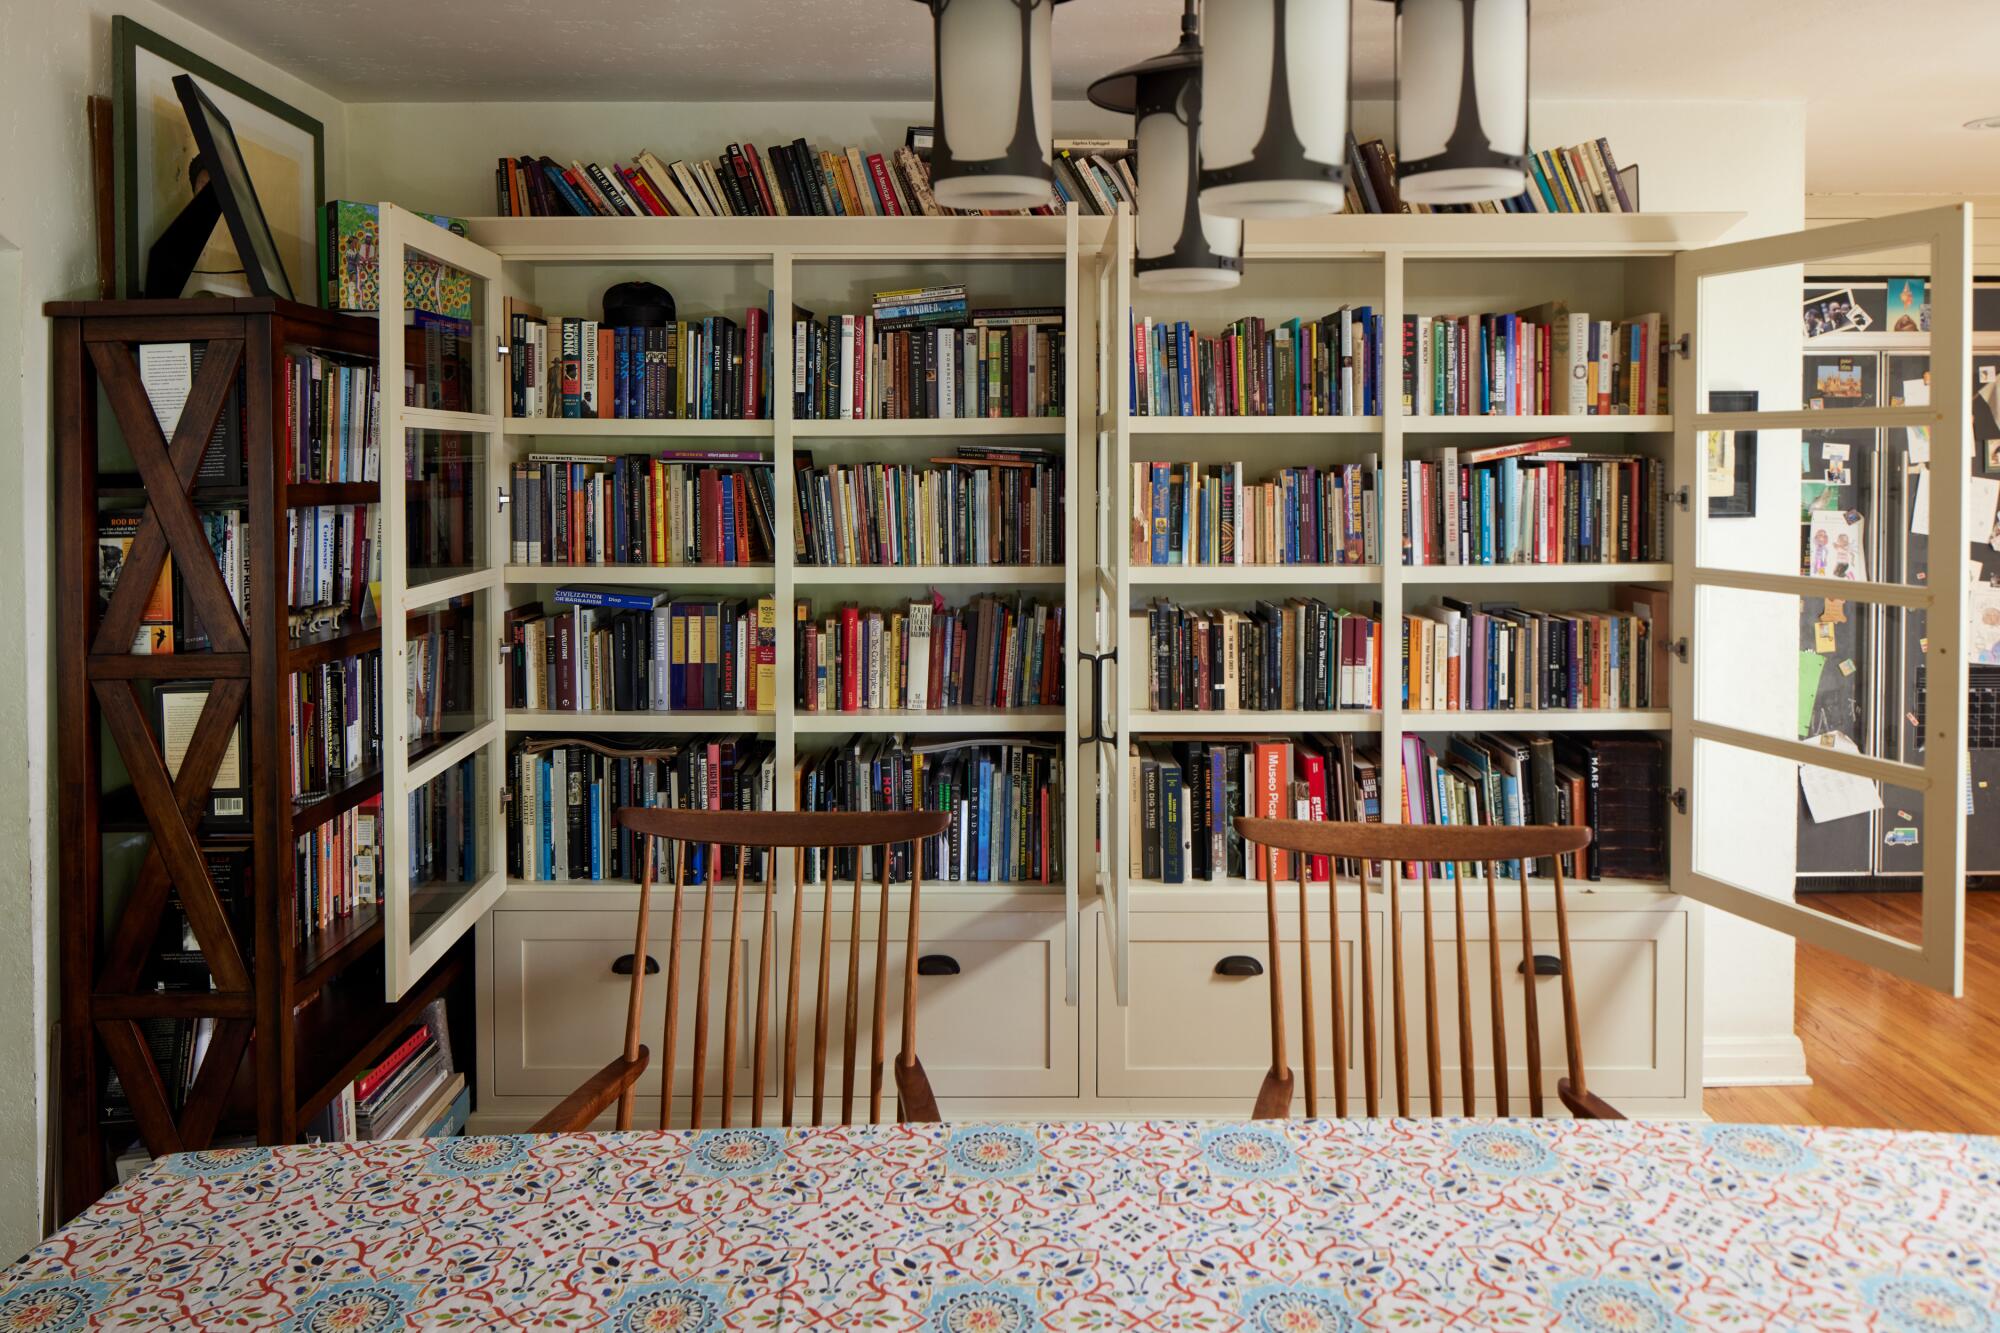 Historian/writer Robin DG Kelley's bookcases at his home in Los Angeles.